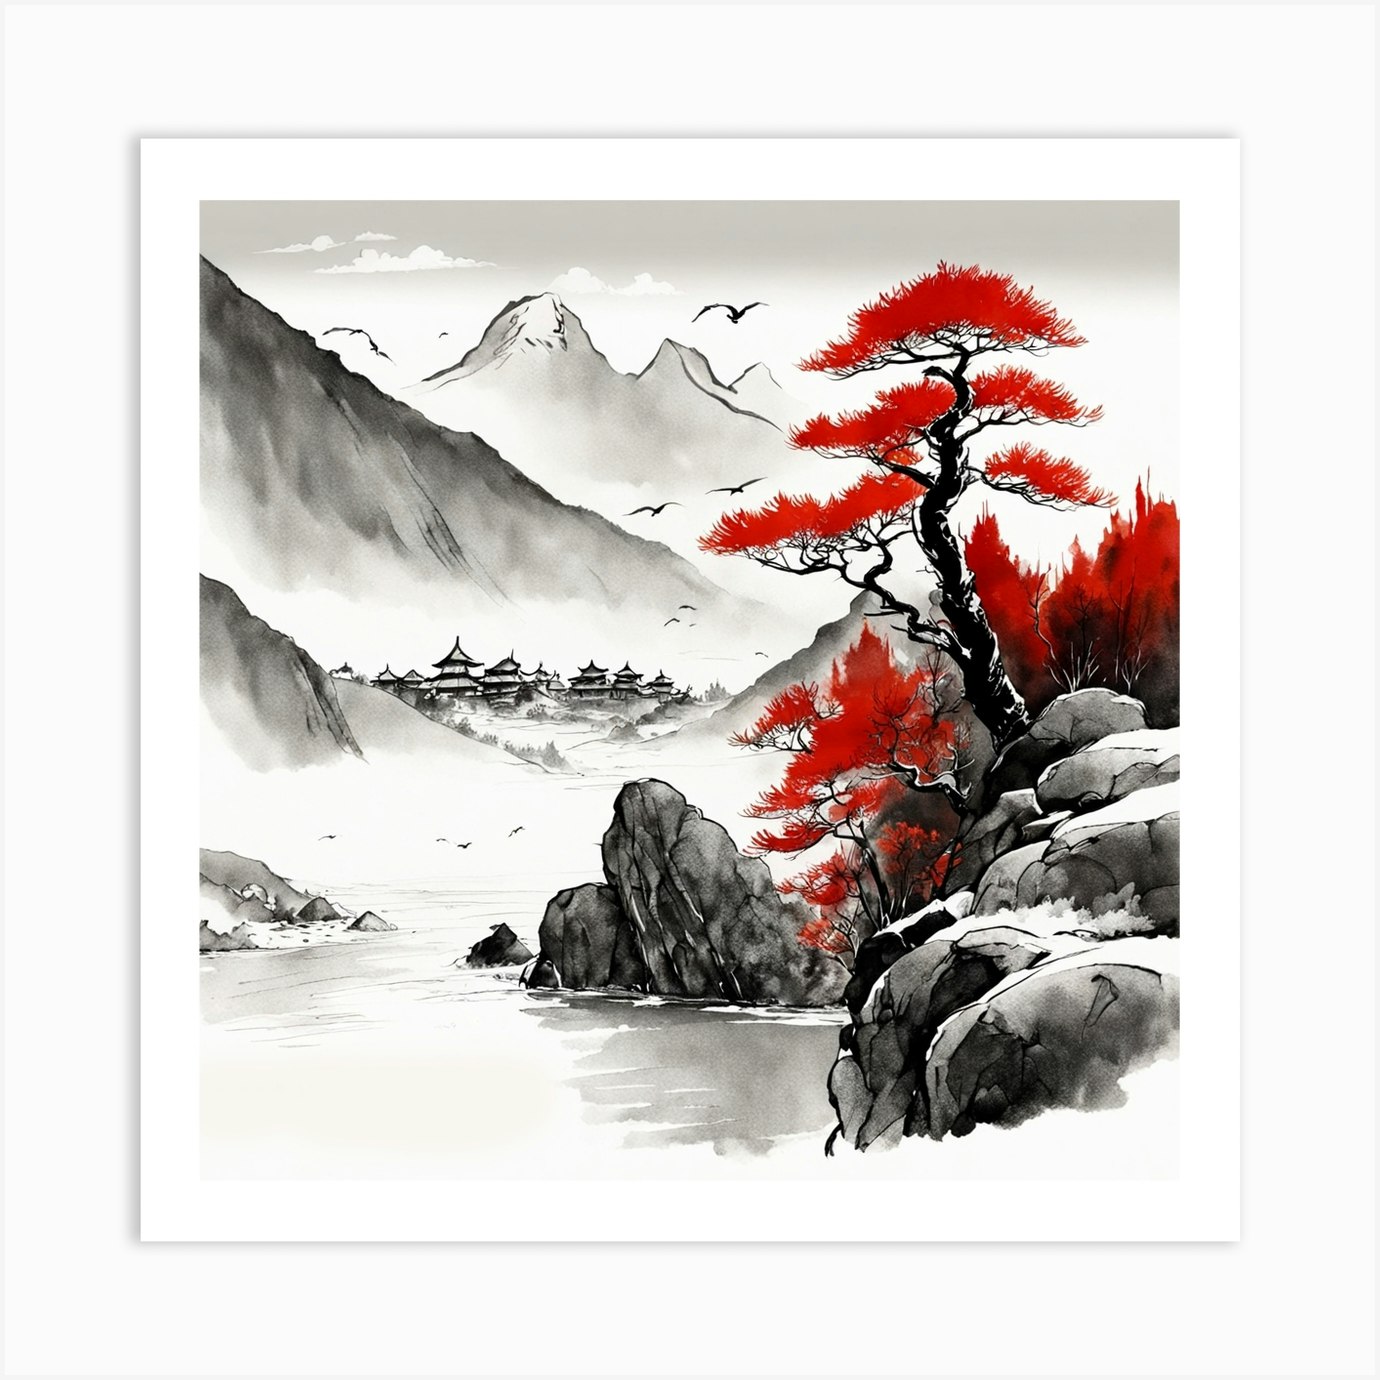 Chinese Ink And Watercolor Painting Of High Mountain Classic Art